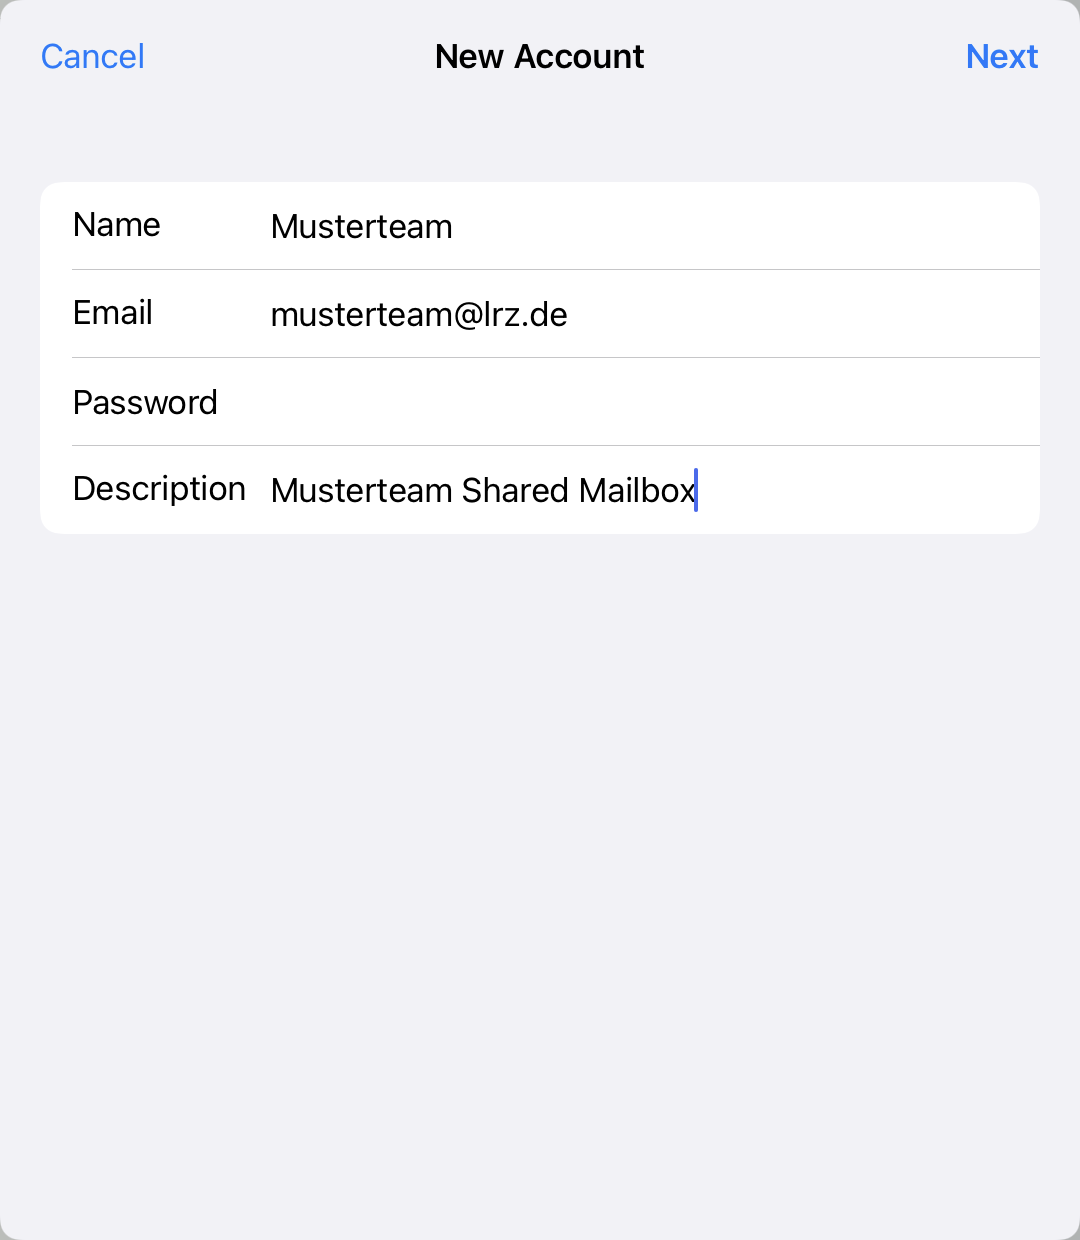 Window New Account, left clickable Cancel, right clickable Next. Name, input field Musterteam. Email, input field musterteam At lrz.de. Password, input field empty. Description, input field Musterteam Shared Mailbox.